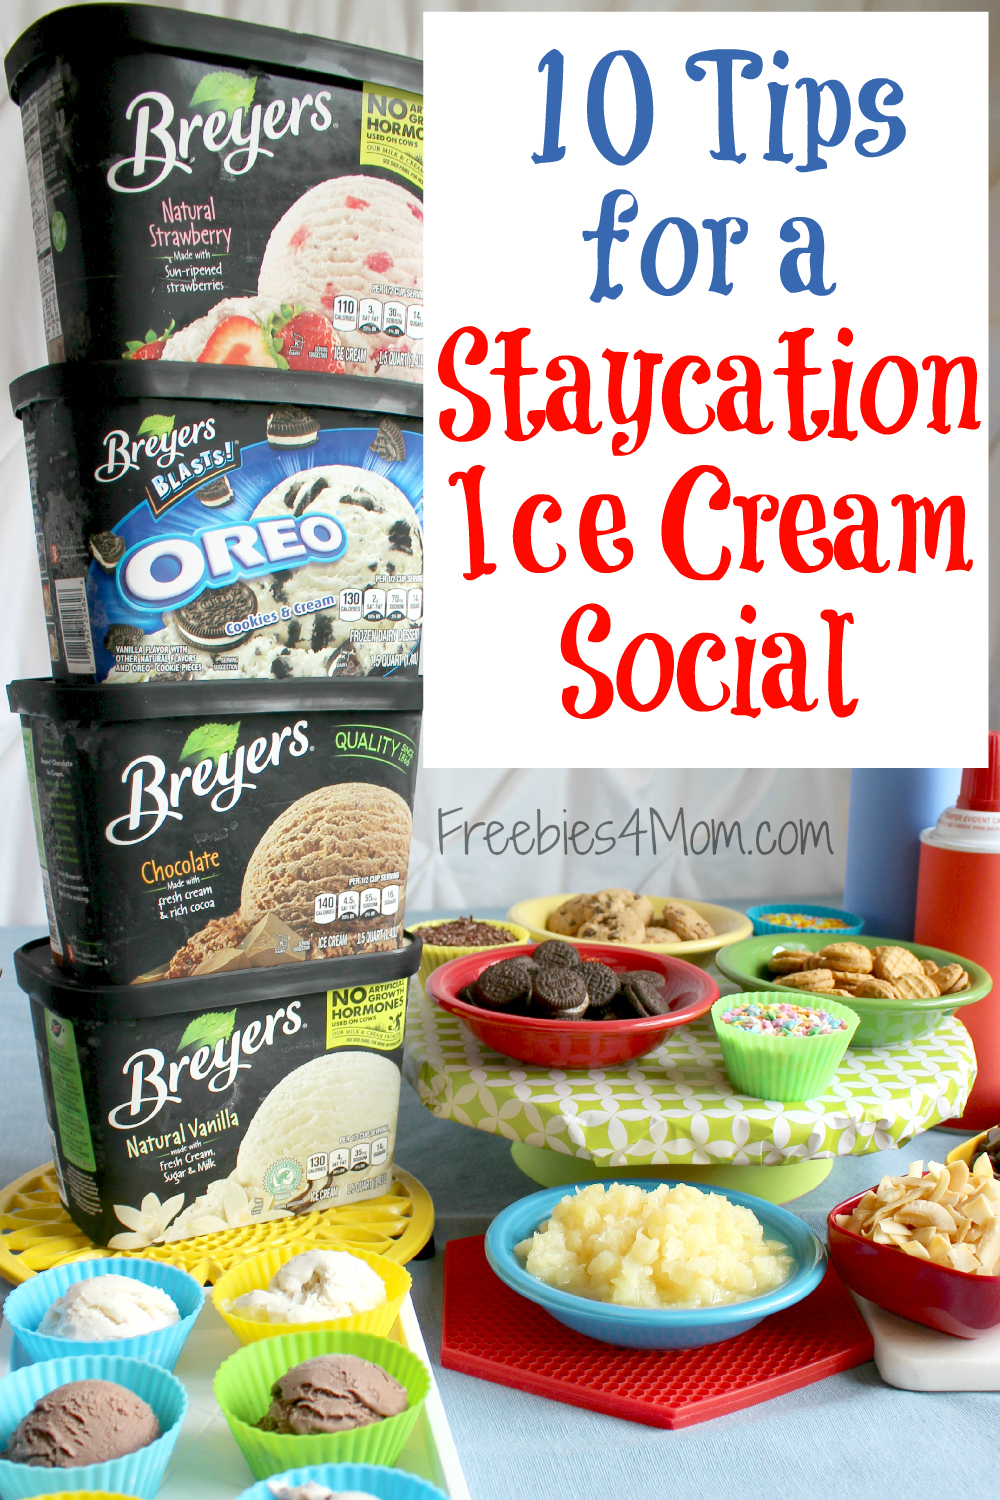 10 Tips for a Staycation Ice Cream Social